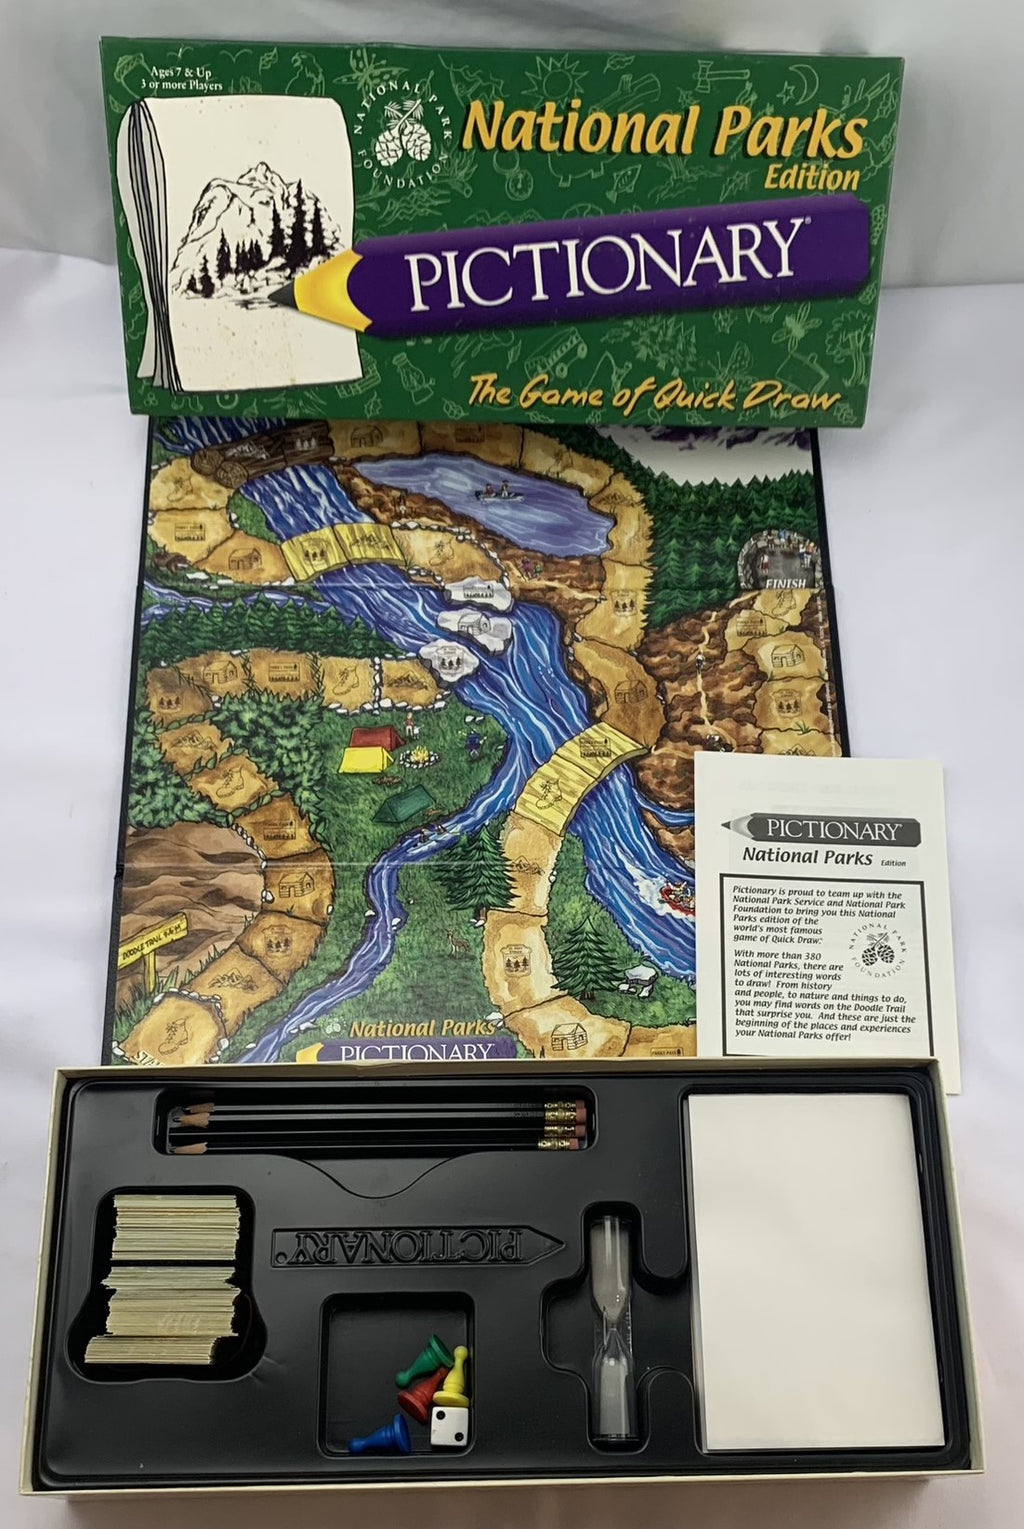 Pictionary National Parks Edition - 2001 - USAopoly - Great Condition